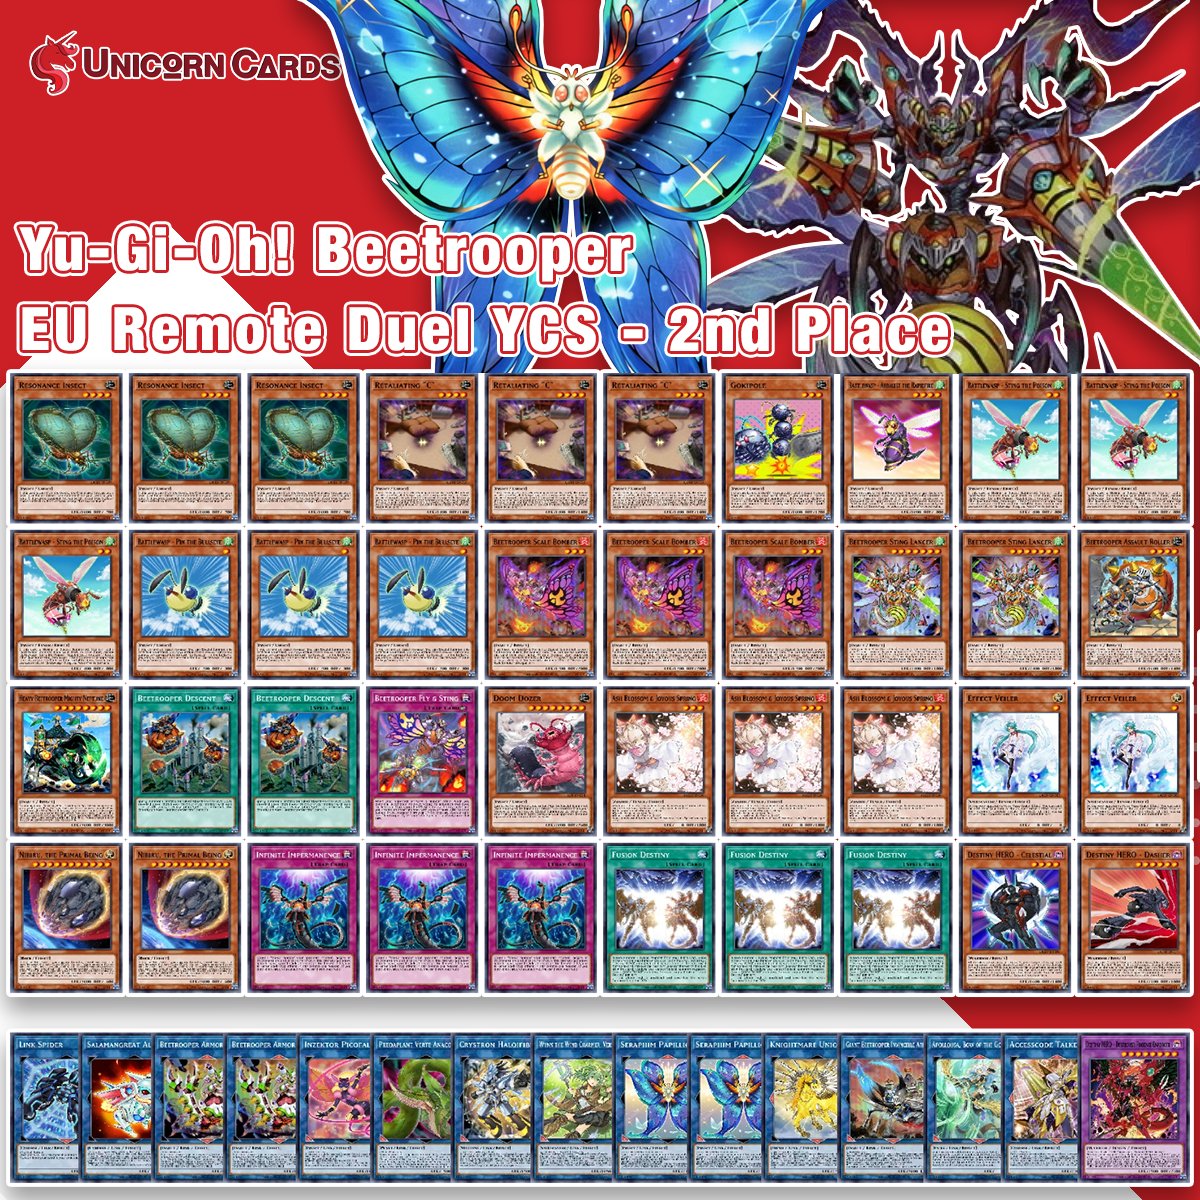 test ツイッターメディア - Beetrooper Deck:Creator: Herman HanssonTournament: EU Remote Duel YCS - Dec 12th 2021Placement: 2nd PlacePlease share your thoughts on this deck❗https://t.co/4uWUs9qau5#YuGiOh #yugiohcards #yugiohcommunity #yugiohcollection #yugiohcollector #遊戯王 https://t.co/a67RXcNbt4